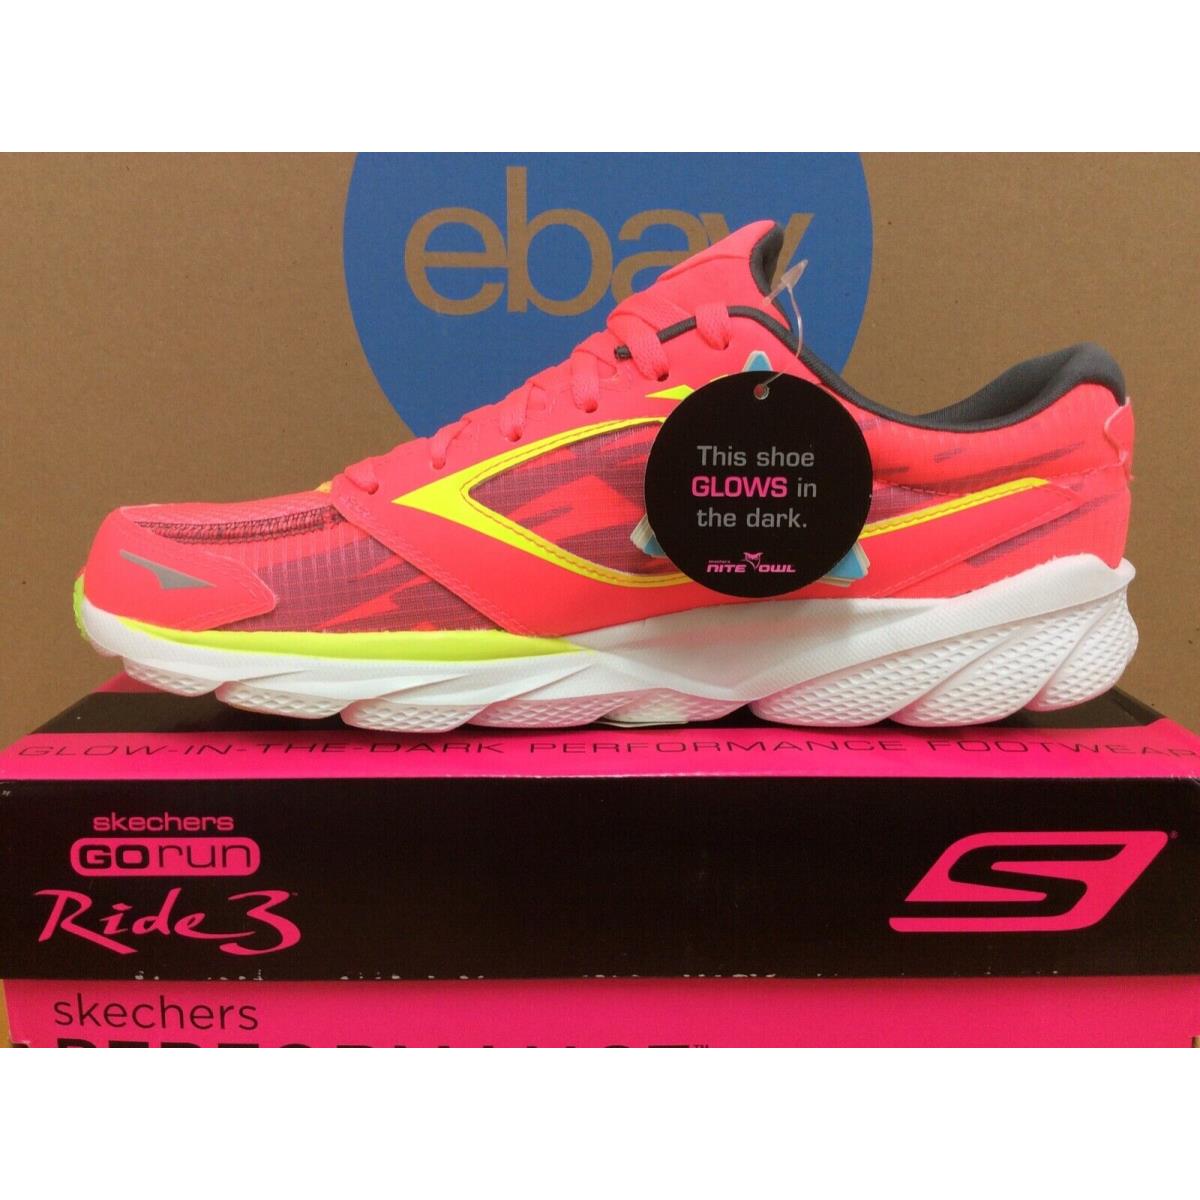 Skechers shoes  - Hot Pink Lime 5